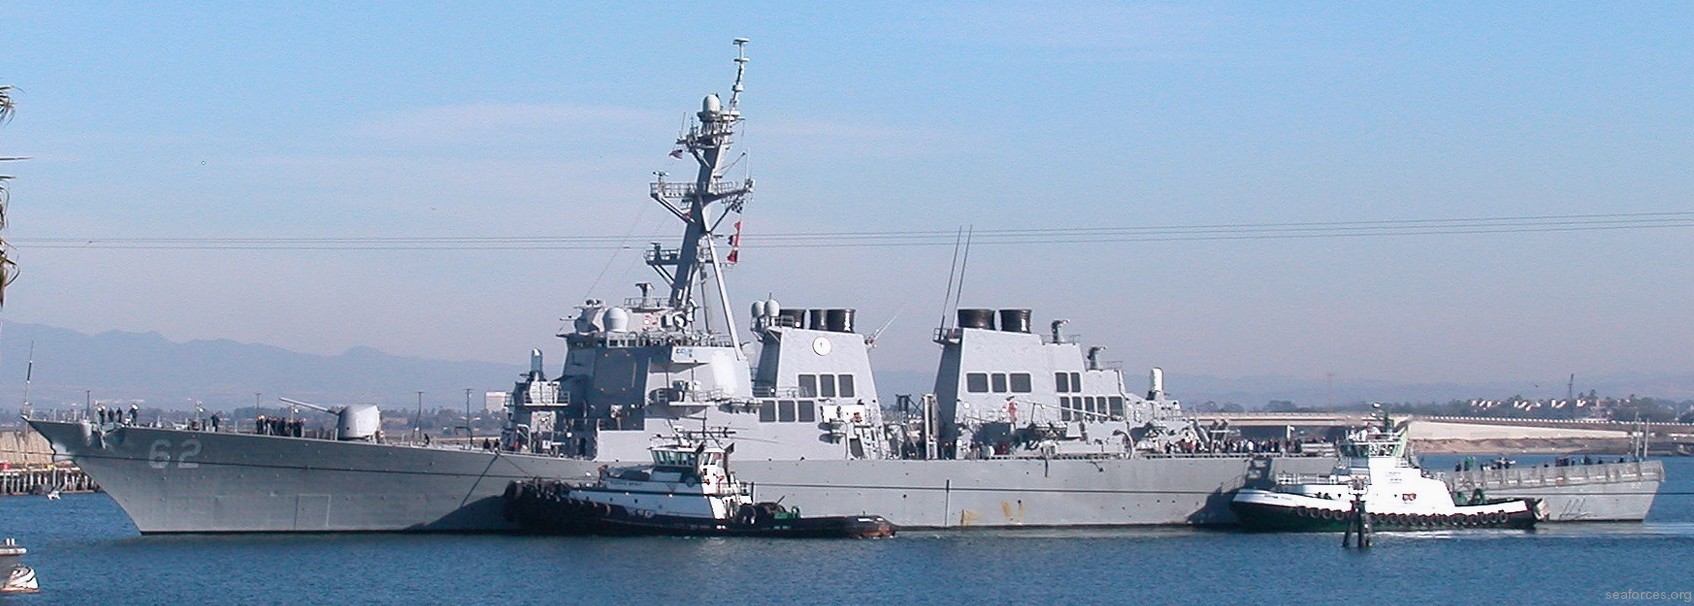 ddg-62 uss fitzgerald guided missile destroyer 2003 95 naval weapon station seal beach california